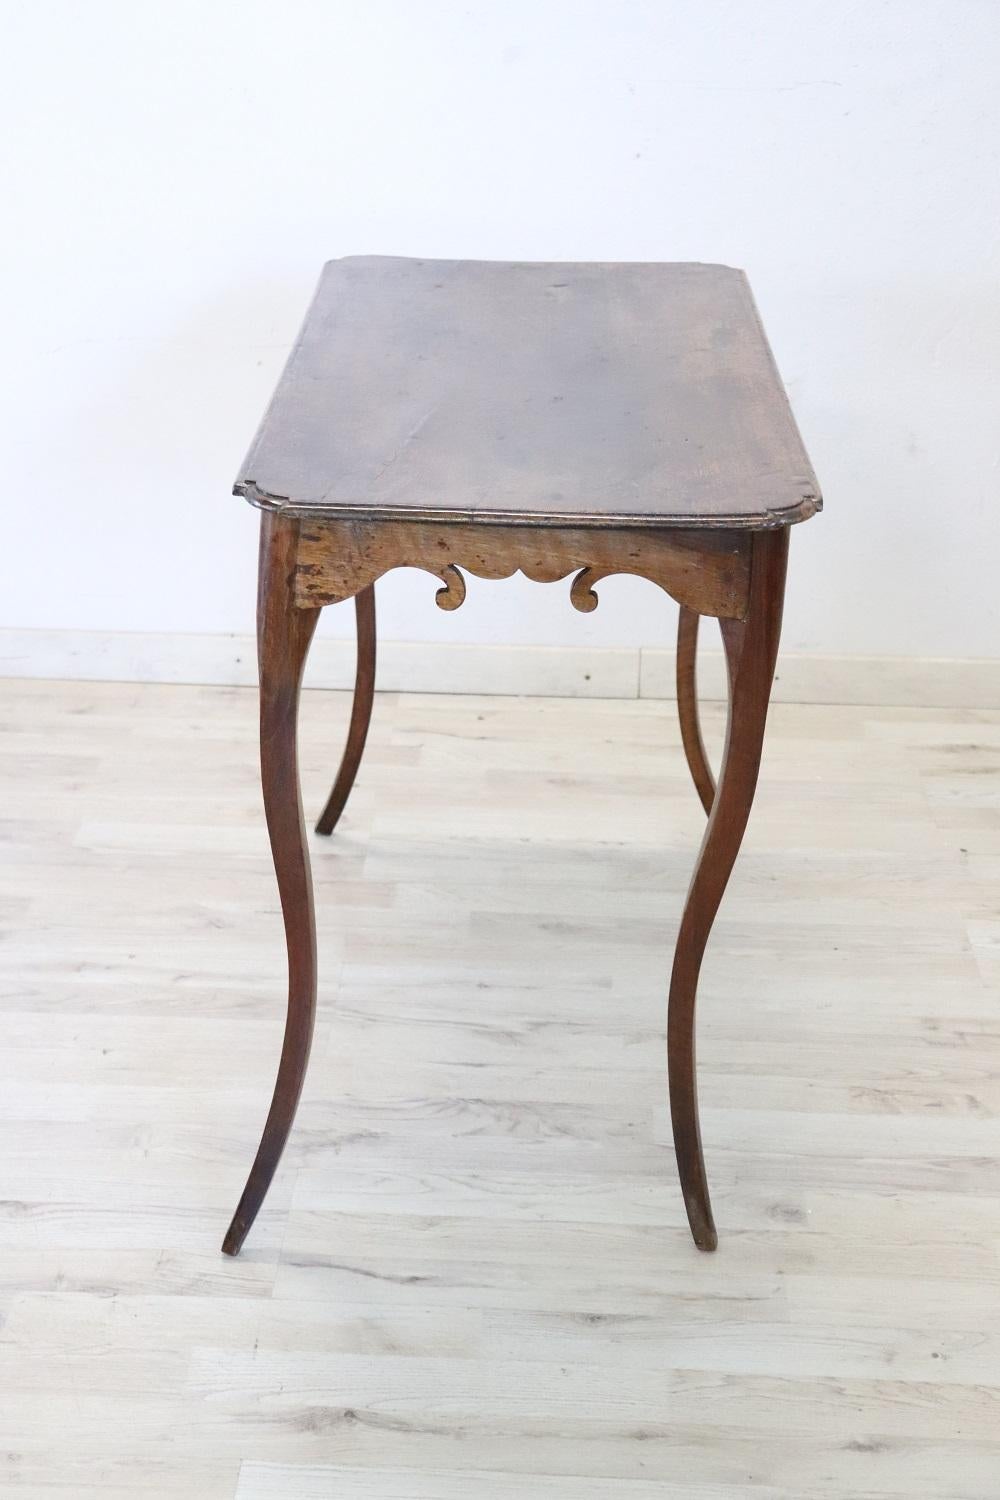 Late 18th Century 18th Century Louis XV Walnut Antique Side Table with Engraved Date 1778 For Sale